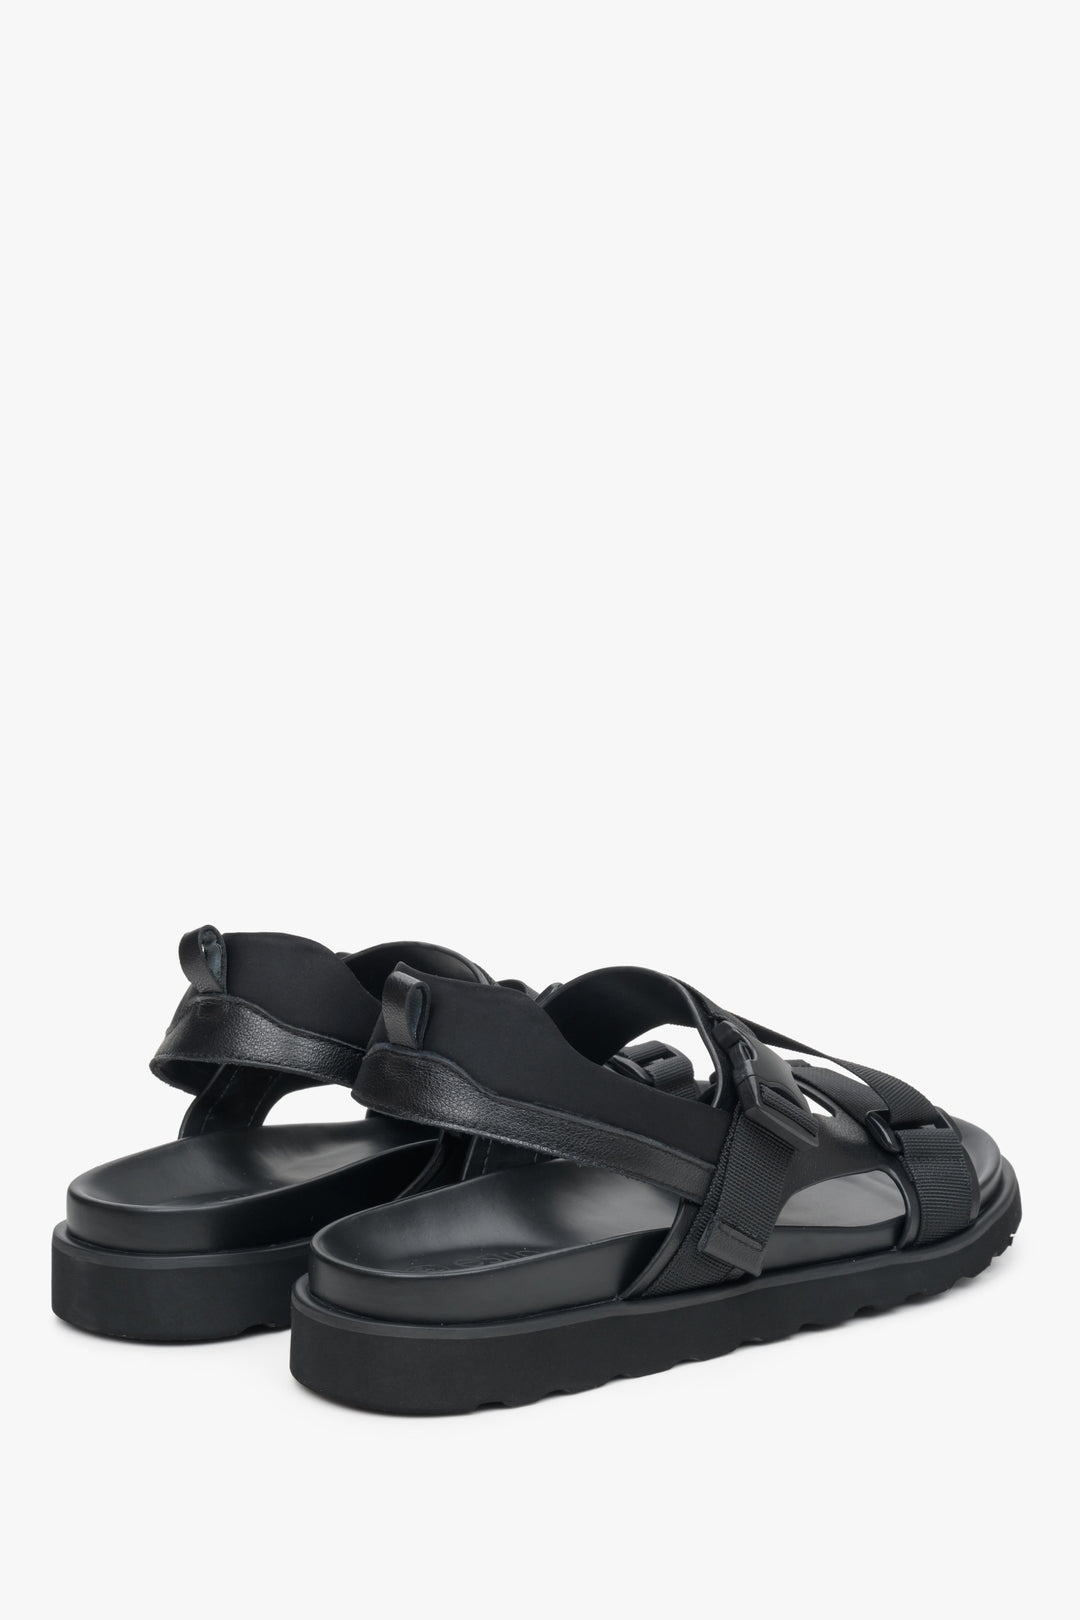 Men's black leather-textile summer sandals with thick straps - close-up on the heel and side line of the shoes.